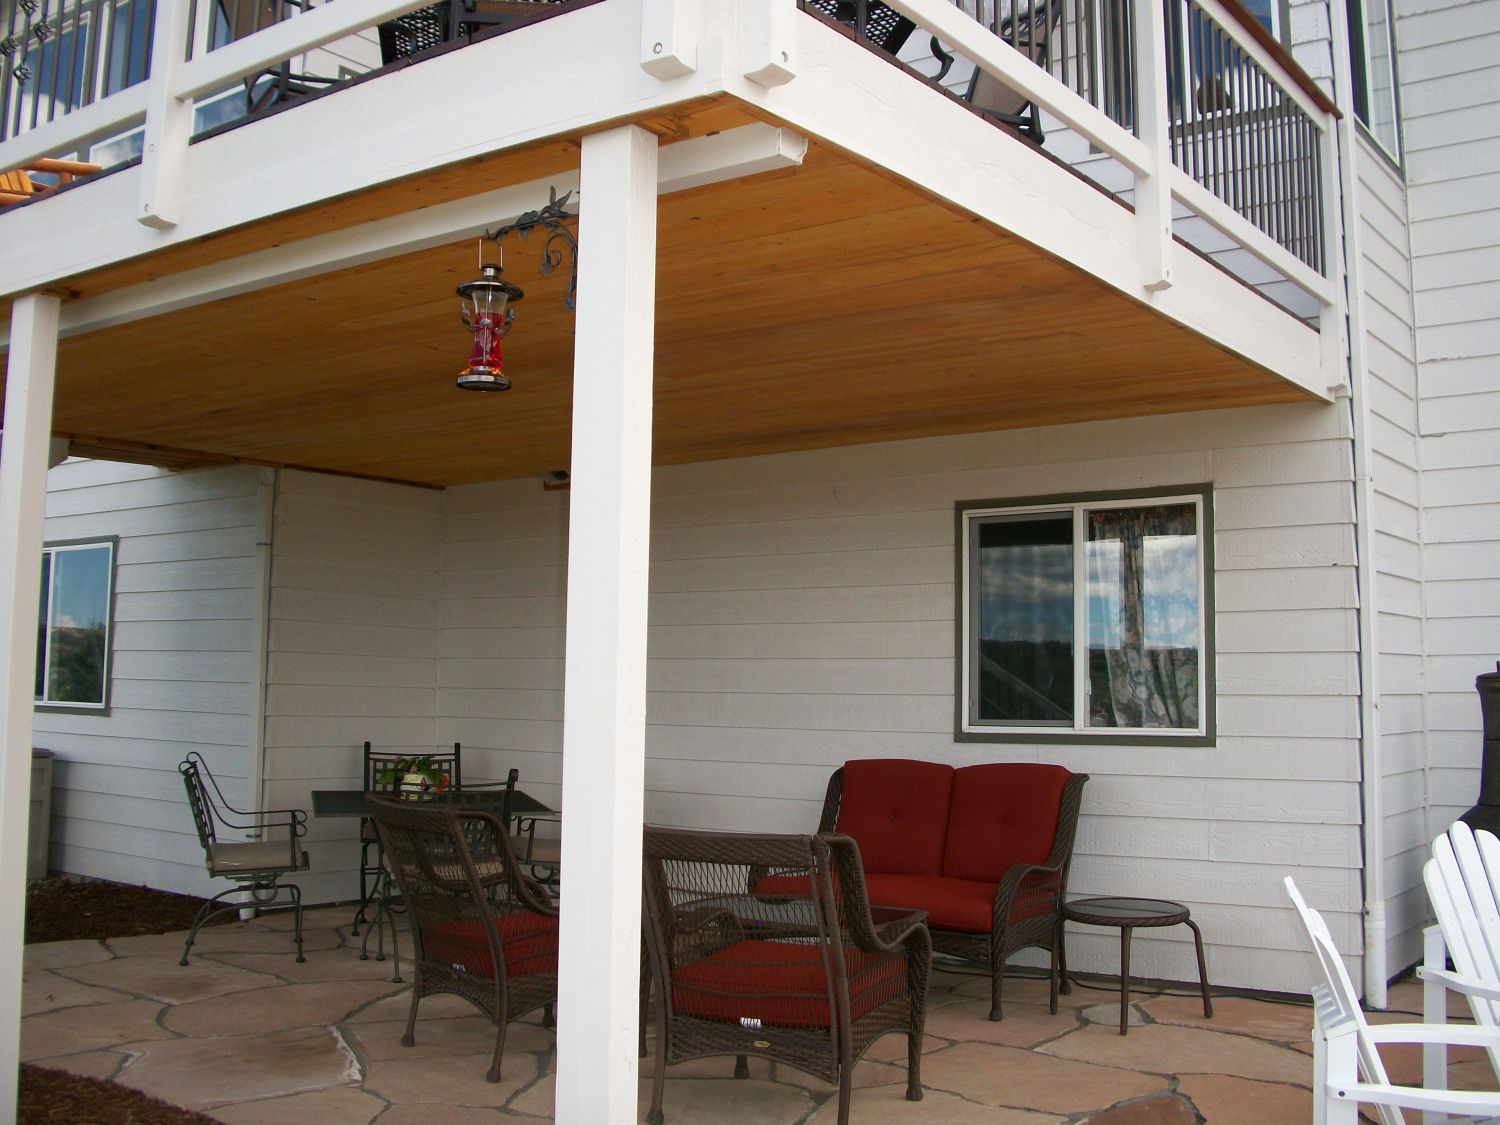 Hardwood deck with an under-deck drainage system that has a flat, tongue and groove ceiling.